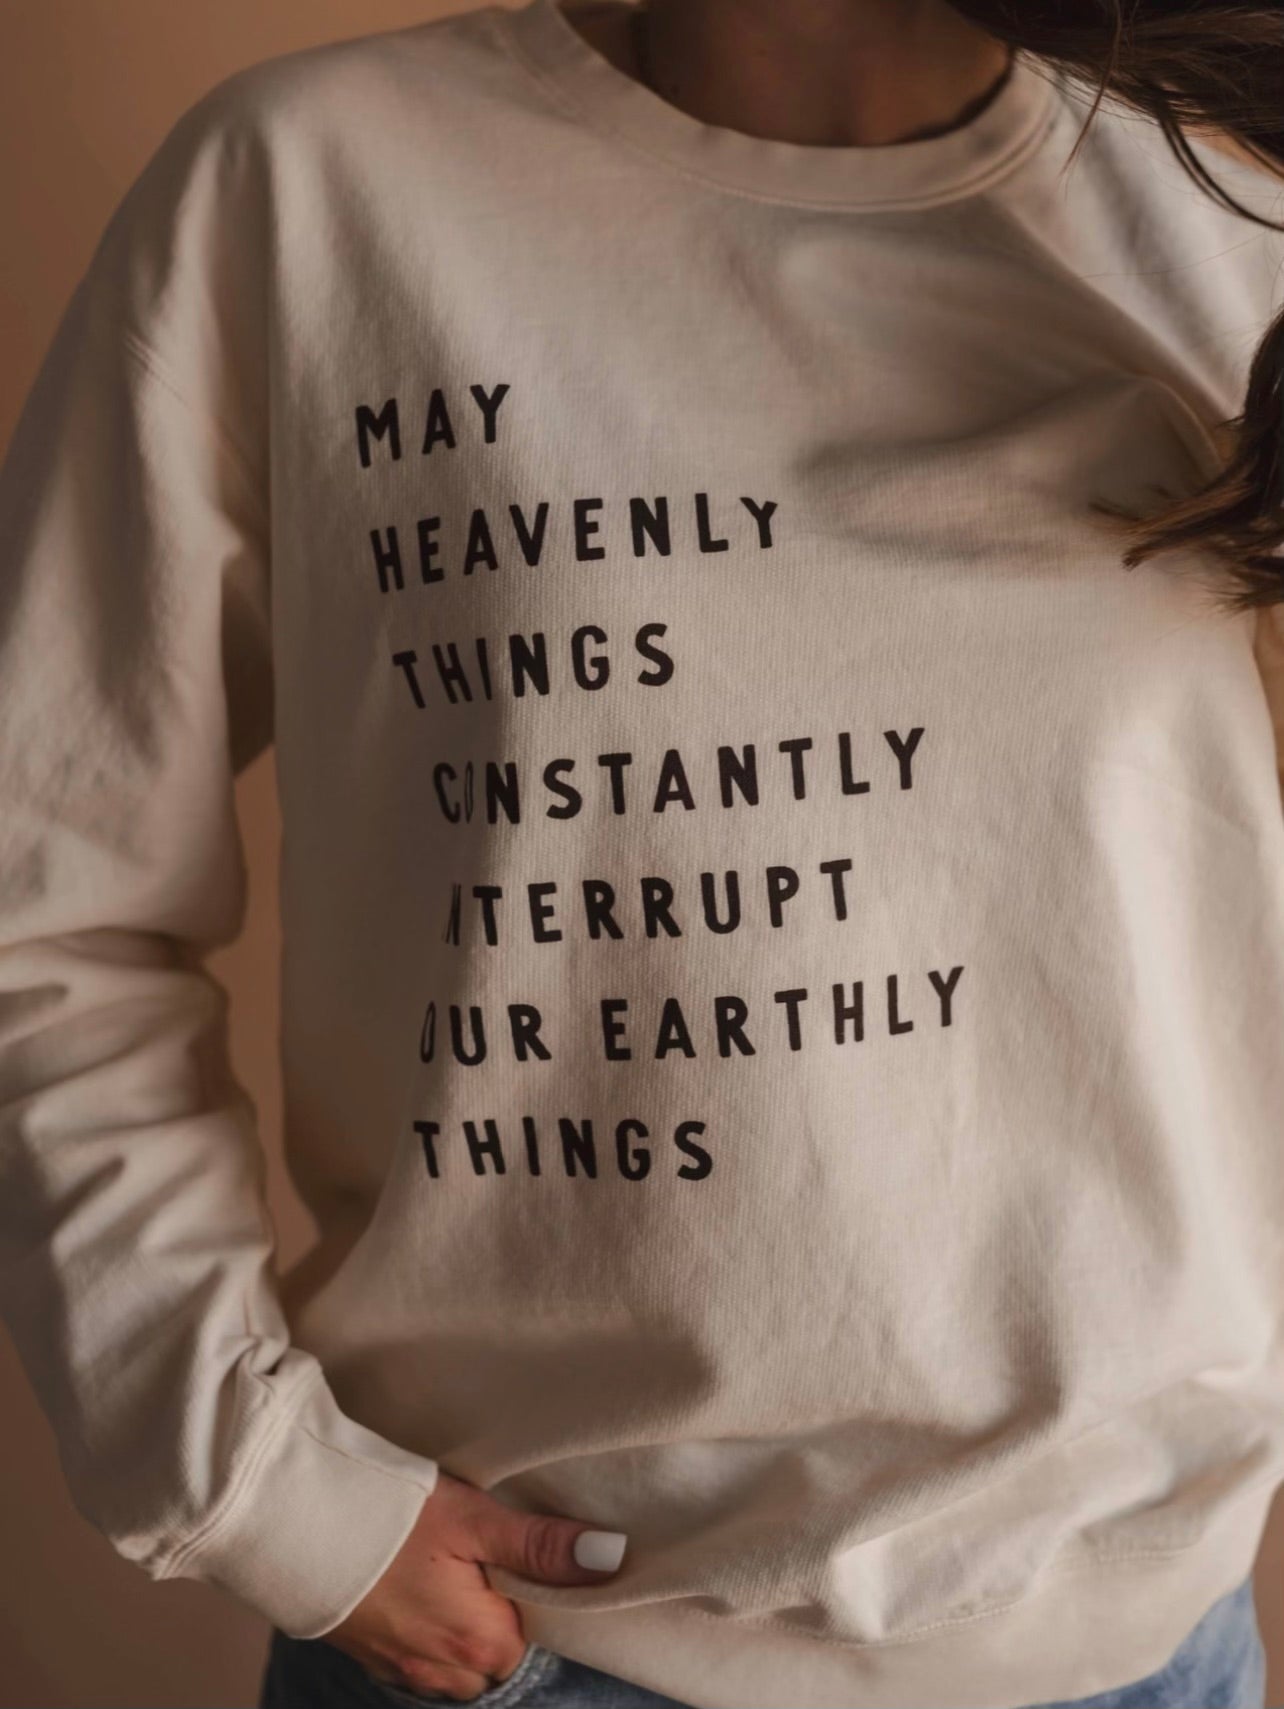 Ivory Heavenly Things Pullover